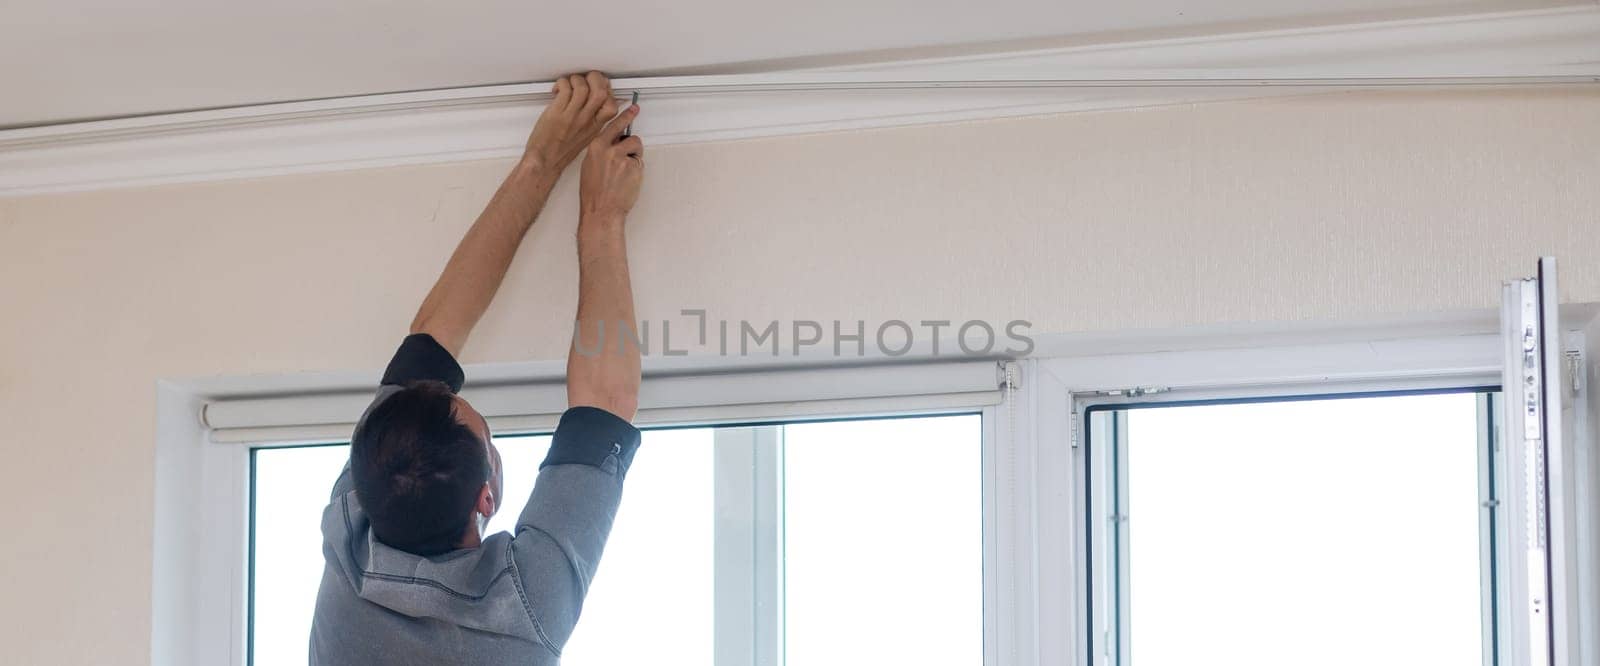 A handyman installing new cornice for curtains, home repair and renovation works by Andelov13